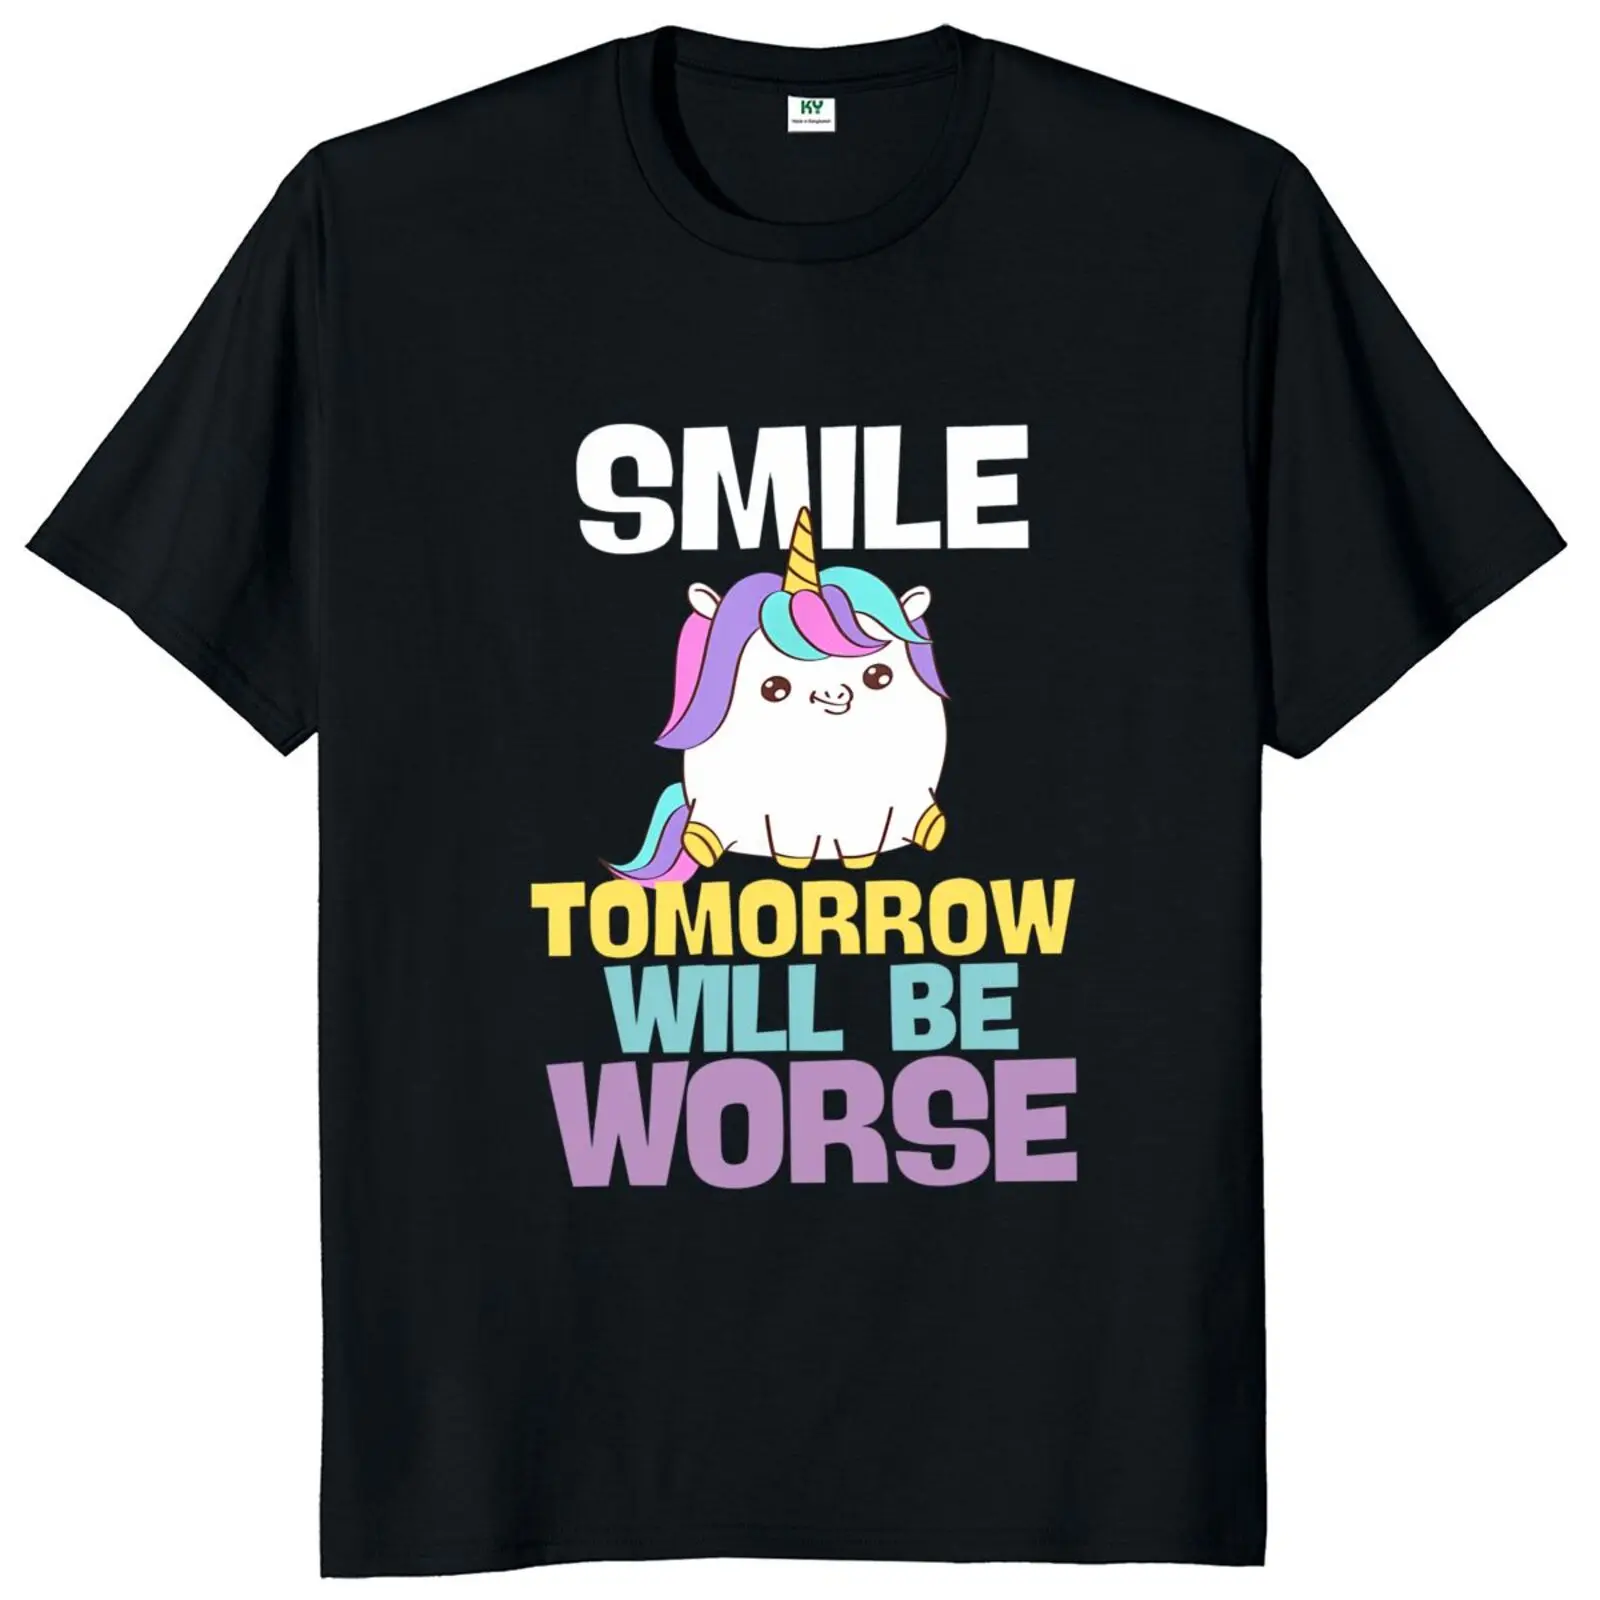 

Smile Tomorrow Will Be Worse Unicorn T Shirt Funny Sayings Humor Gift Tee Tops 100% Cotton Unisex O-neck Summer T-shirts EU Size